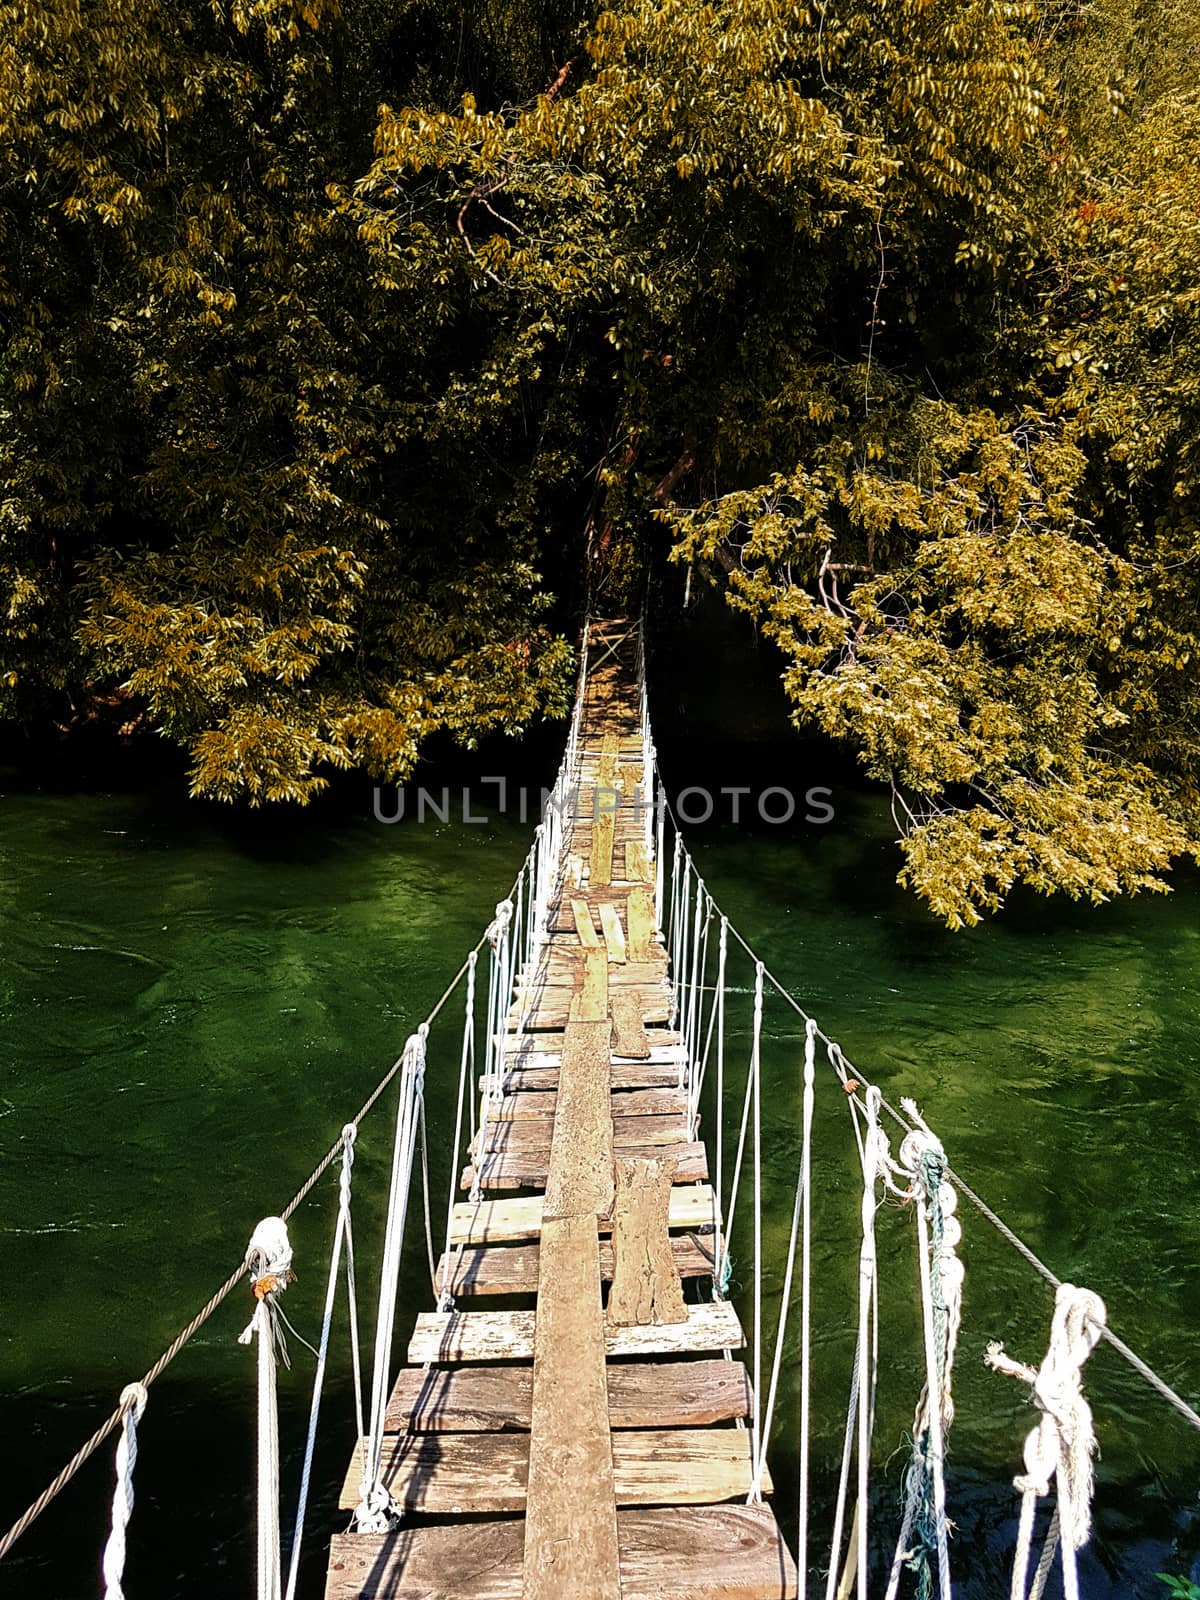 old wooden hanging suspension bridge crossing the river to the forest in autumn season with leaves color change. beautiful nature for background